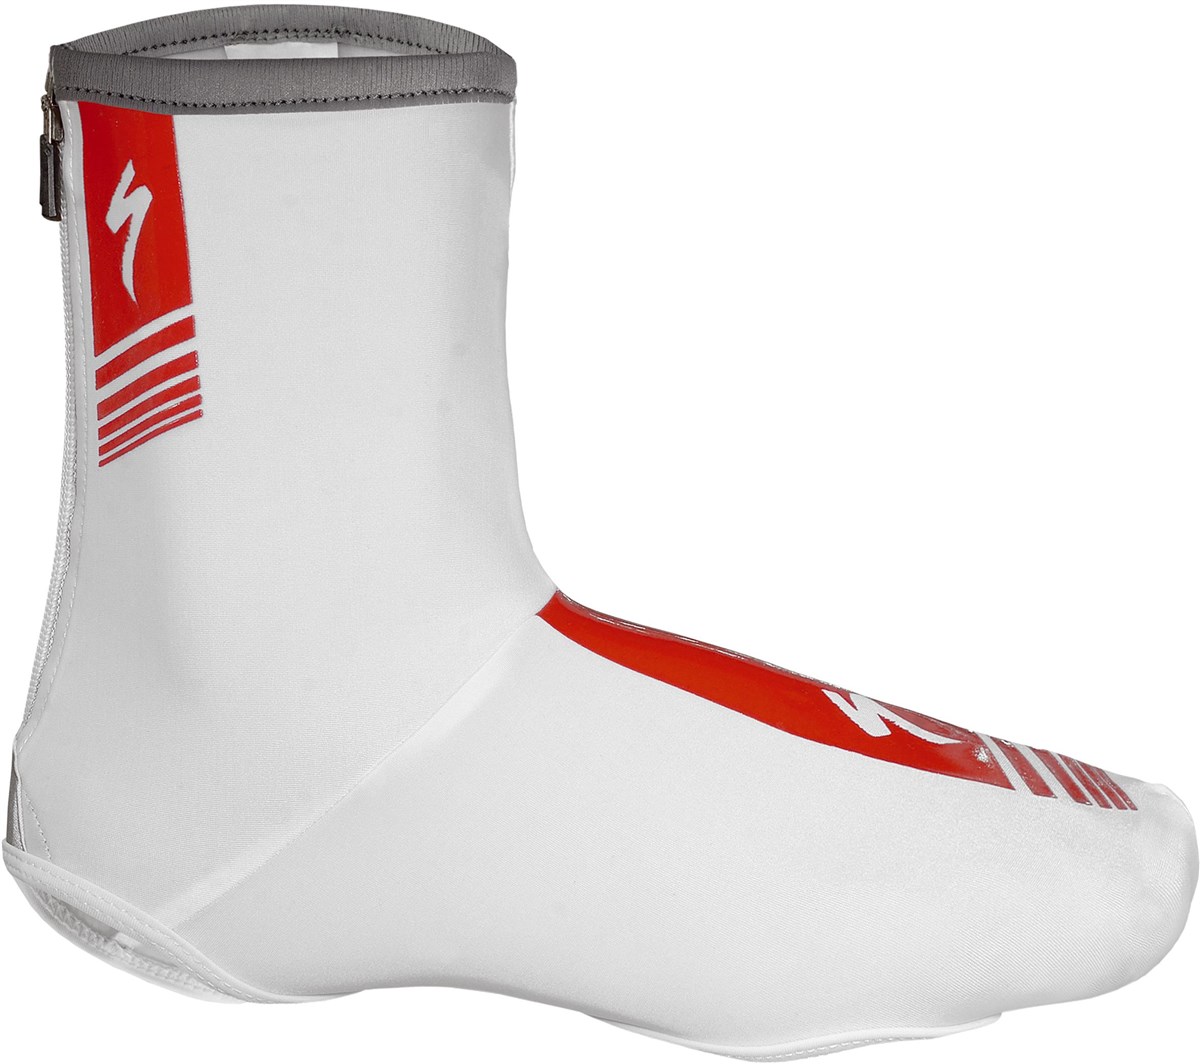 Specialized Elasticised Shoe Covers / Overshoes 2016 product image